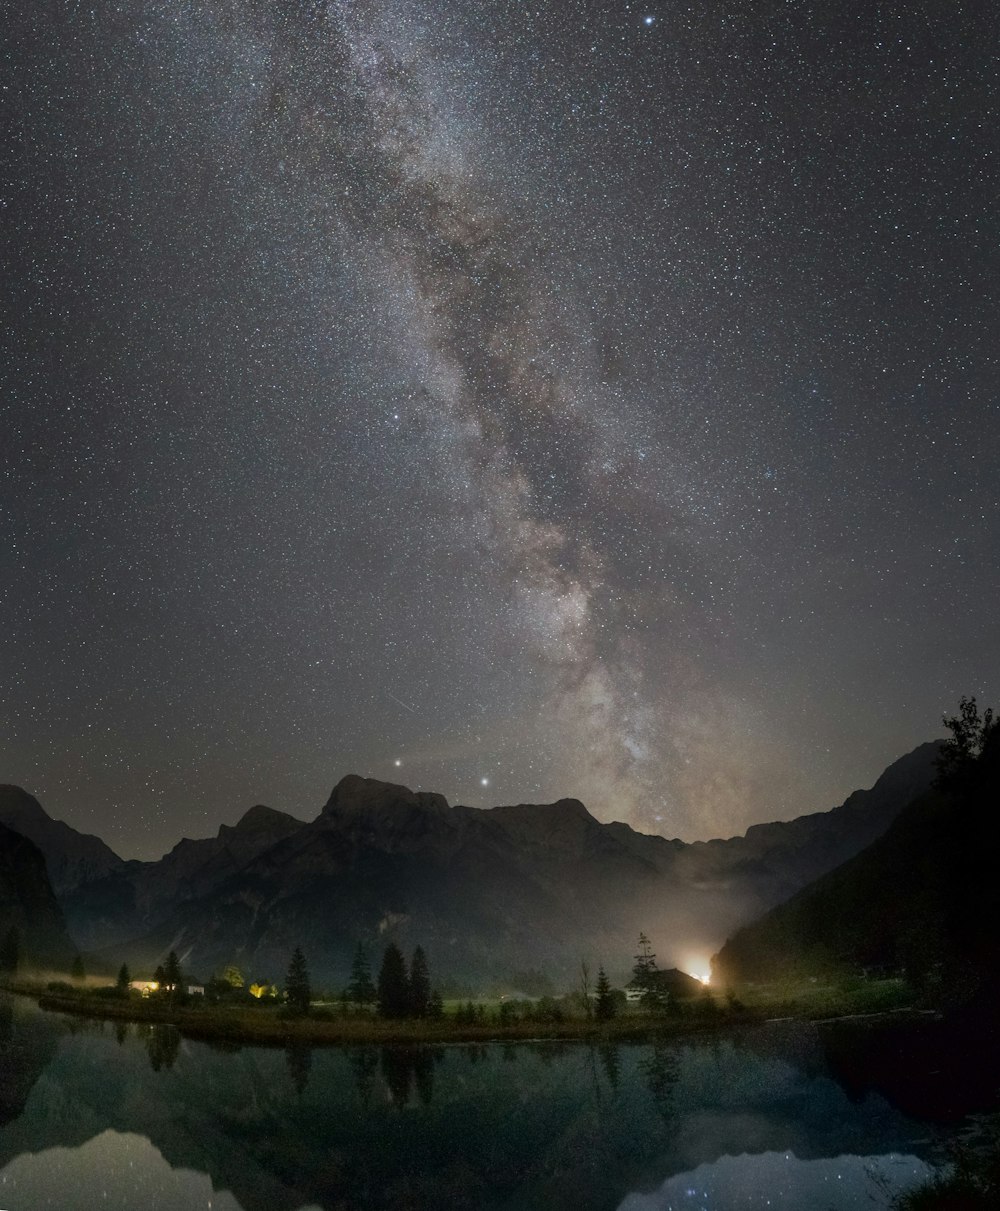 body of water near trees and mountain under starry night